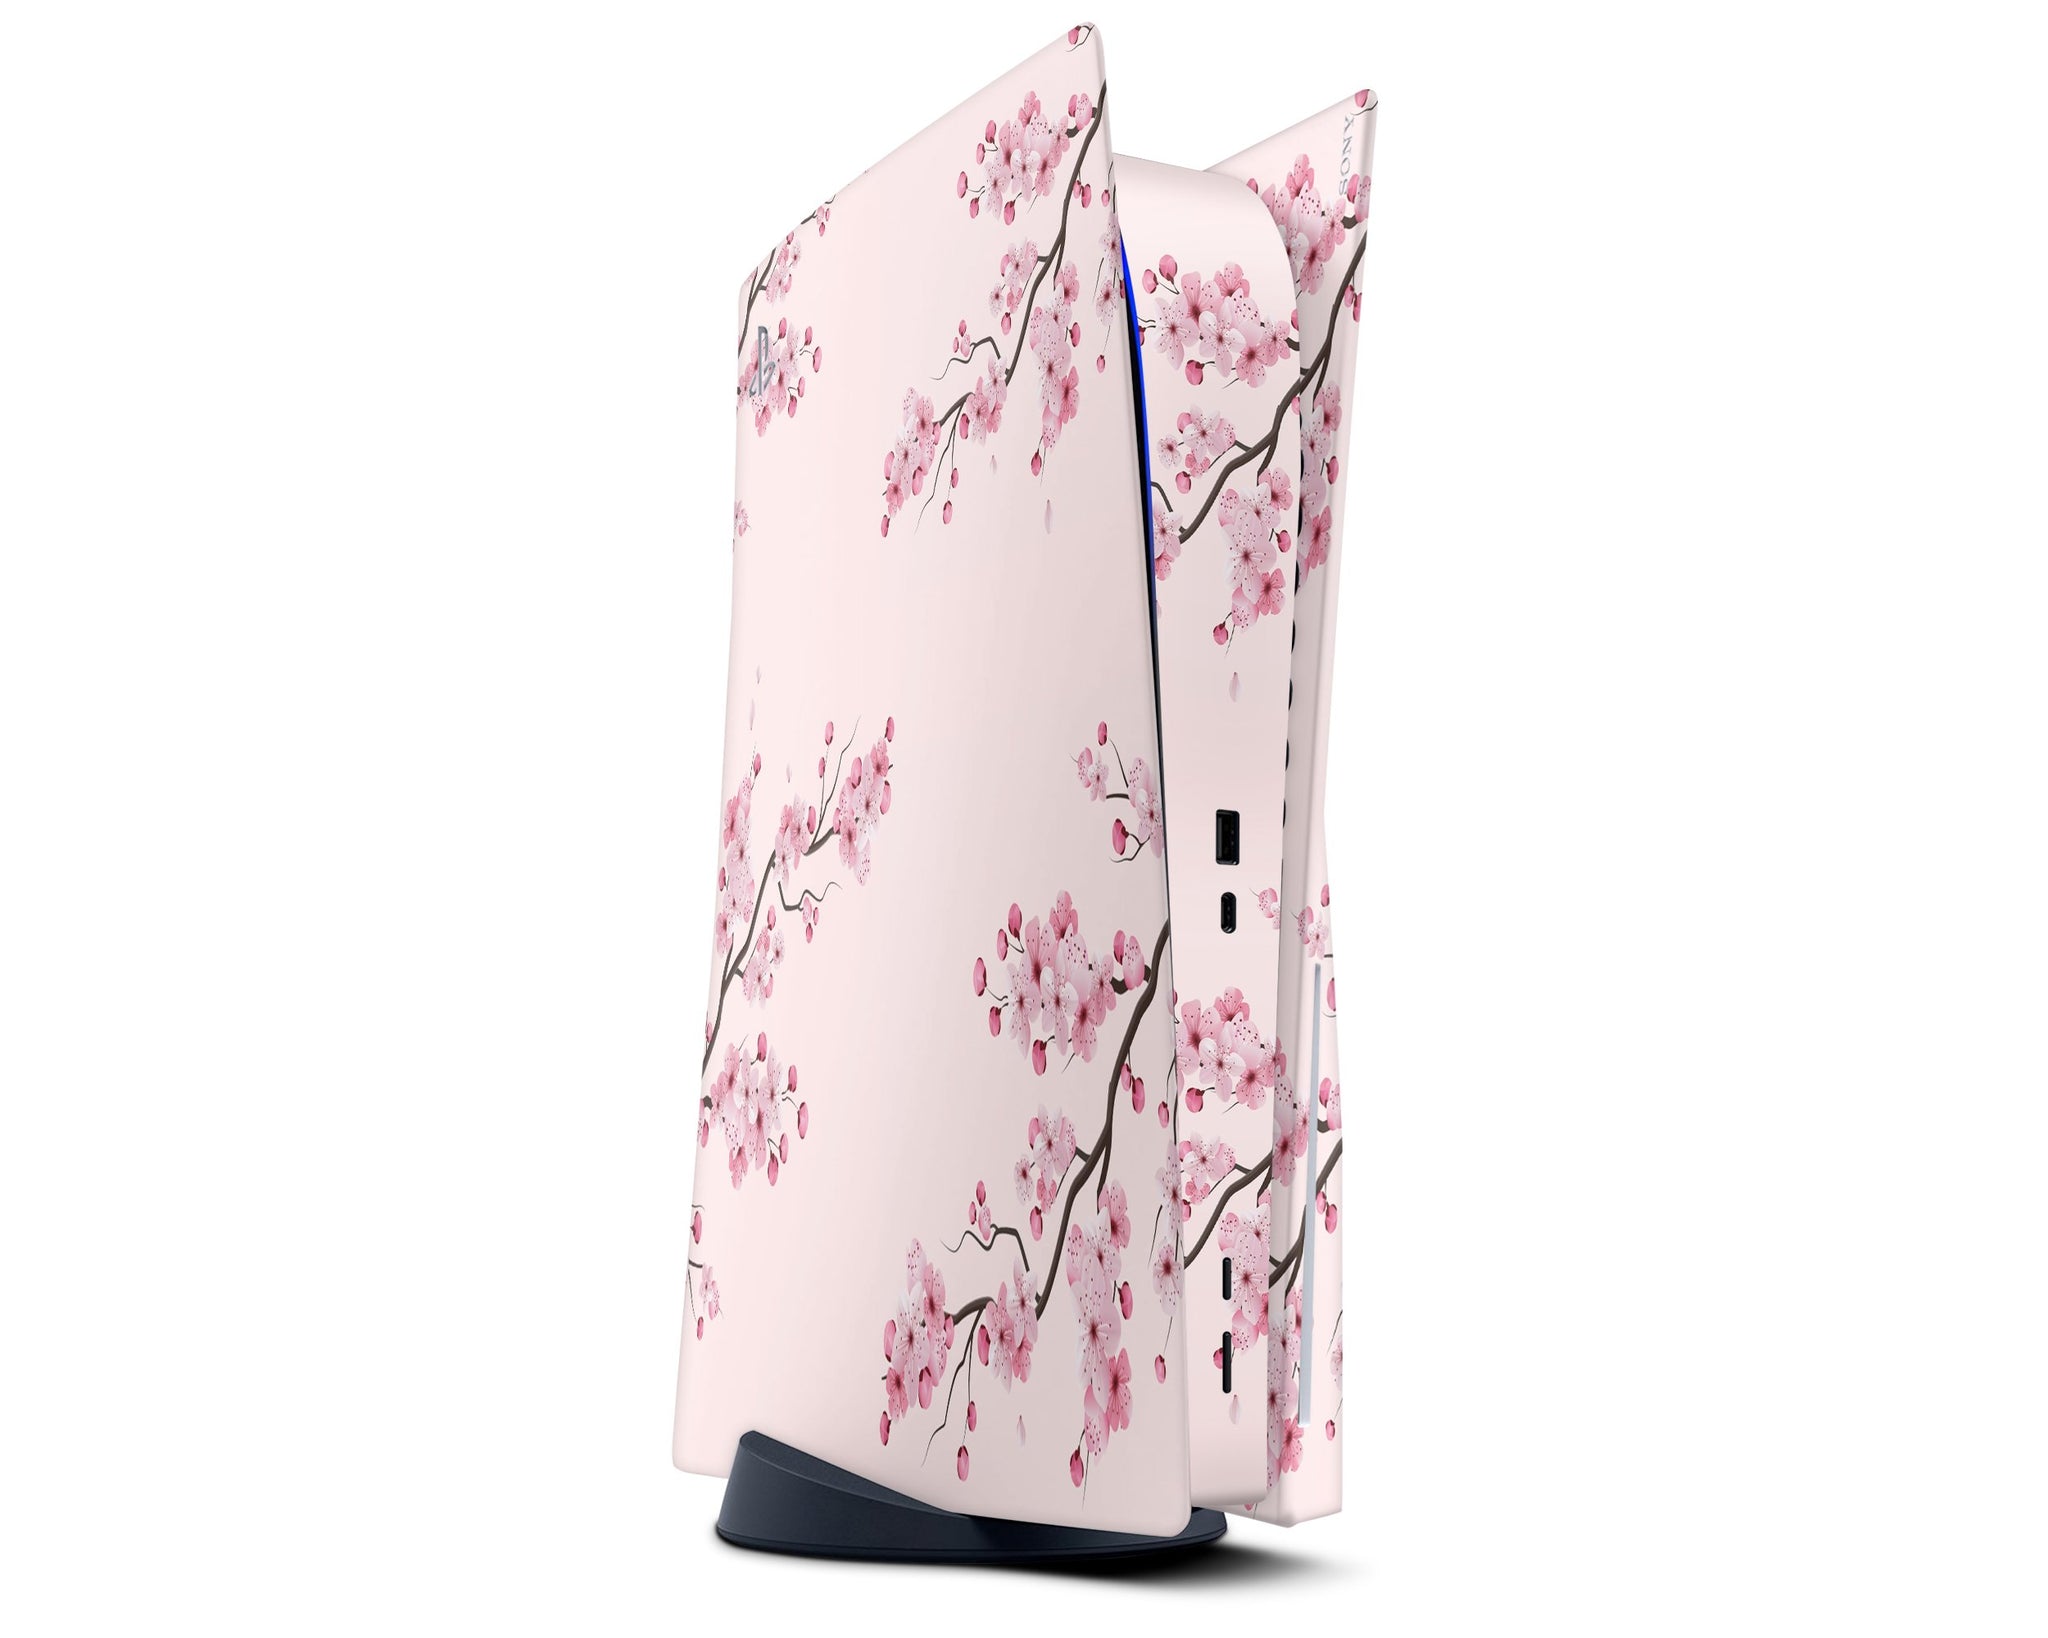 Cherry Blossom Pink PS5 Skin